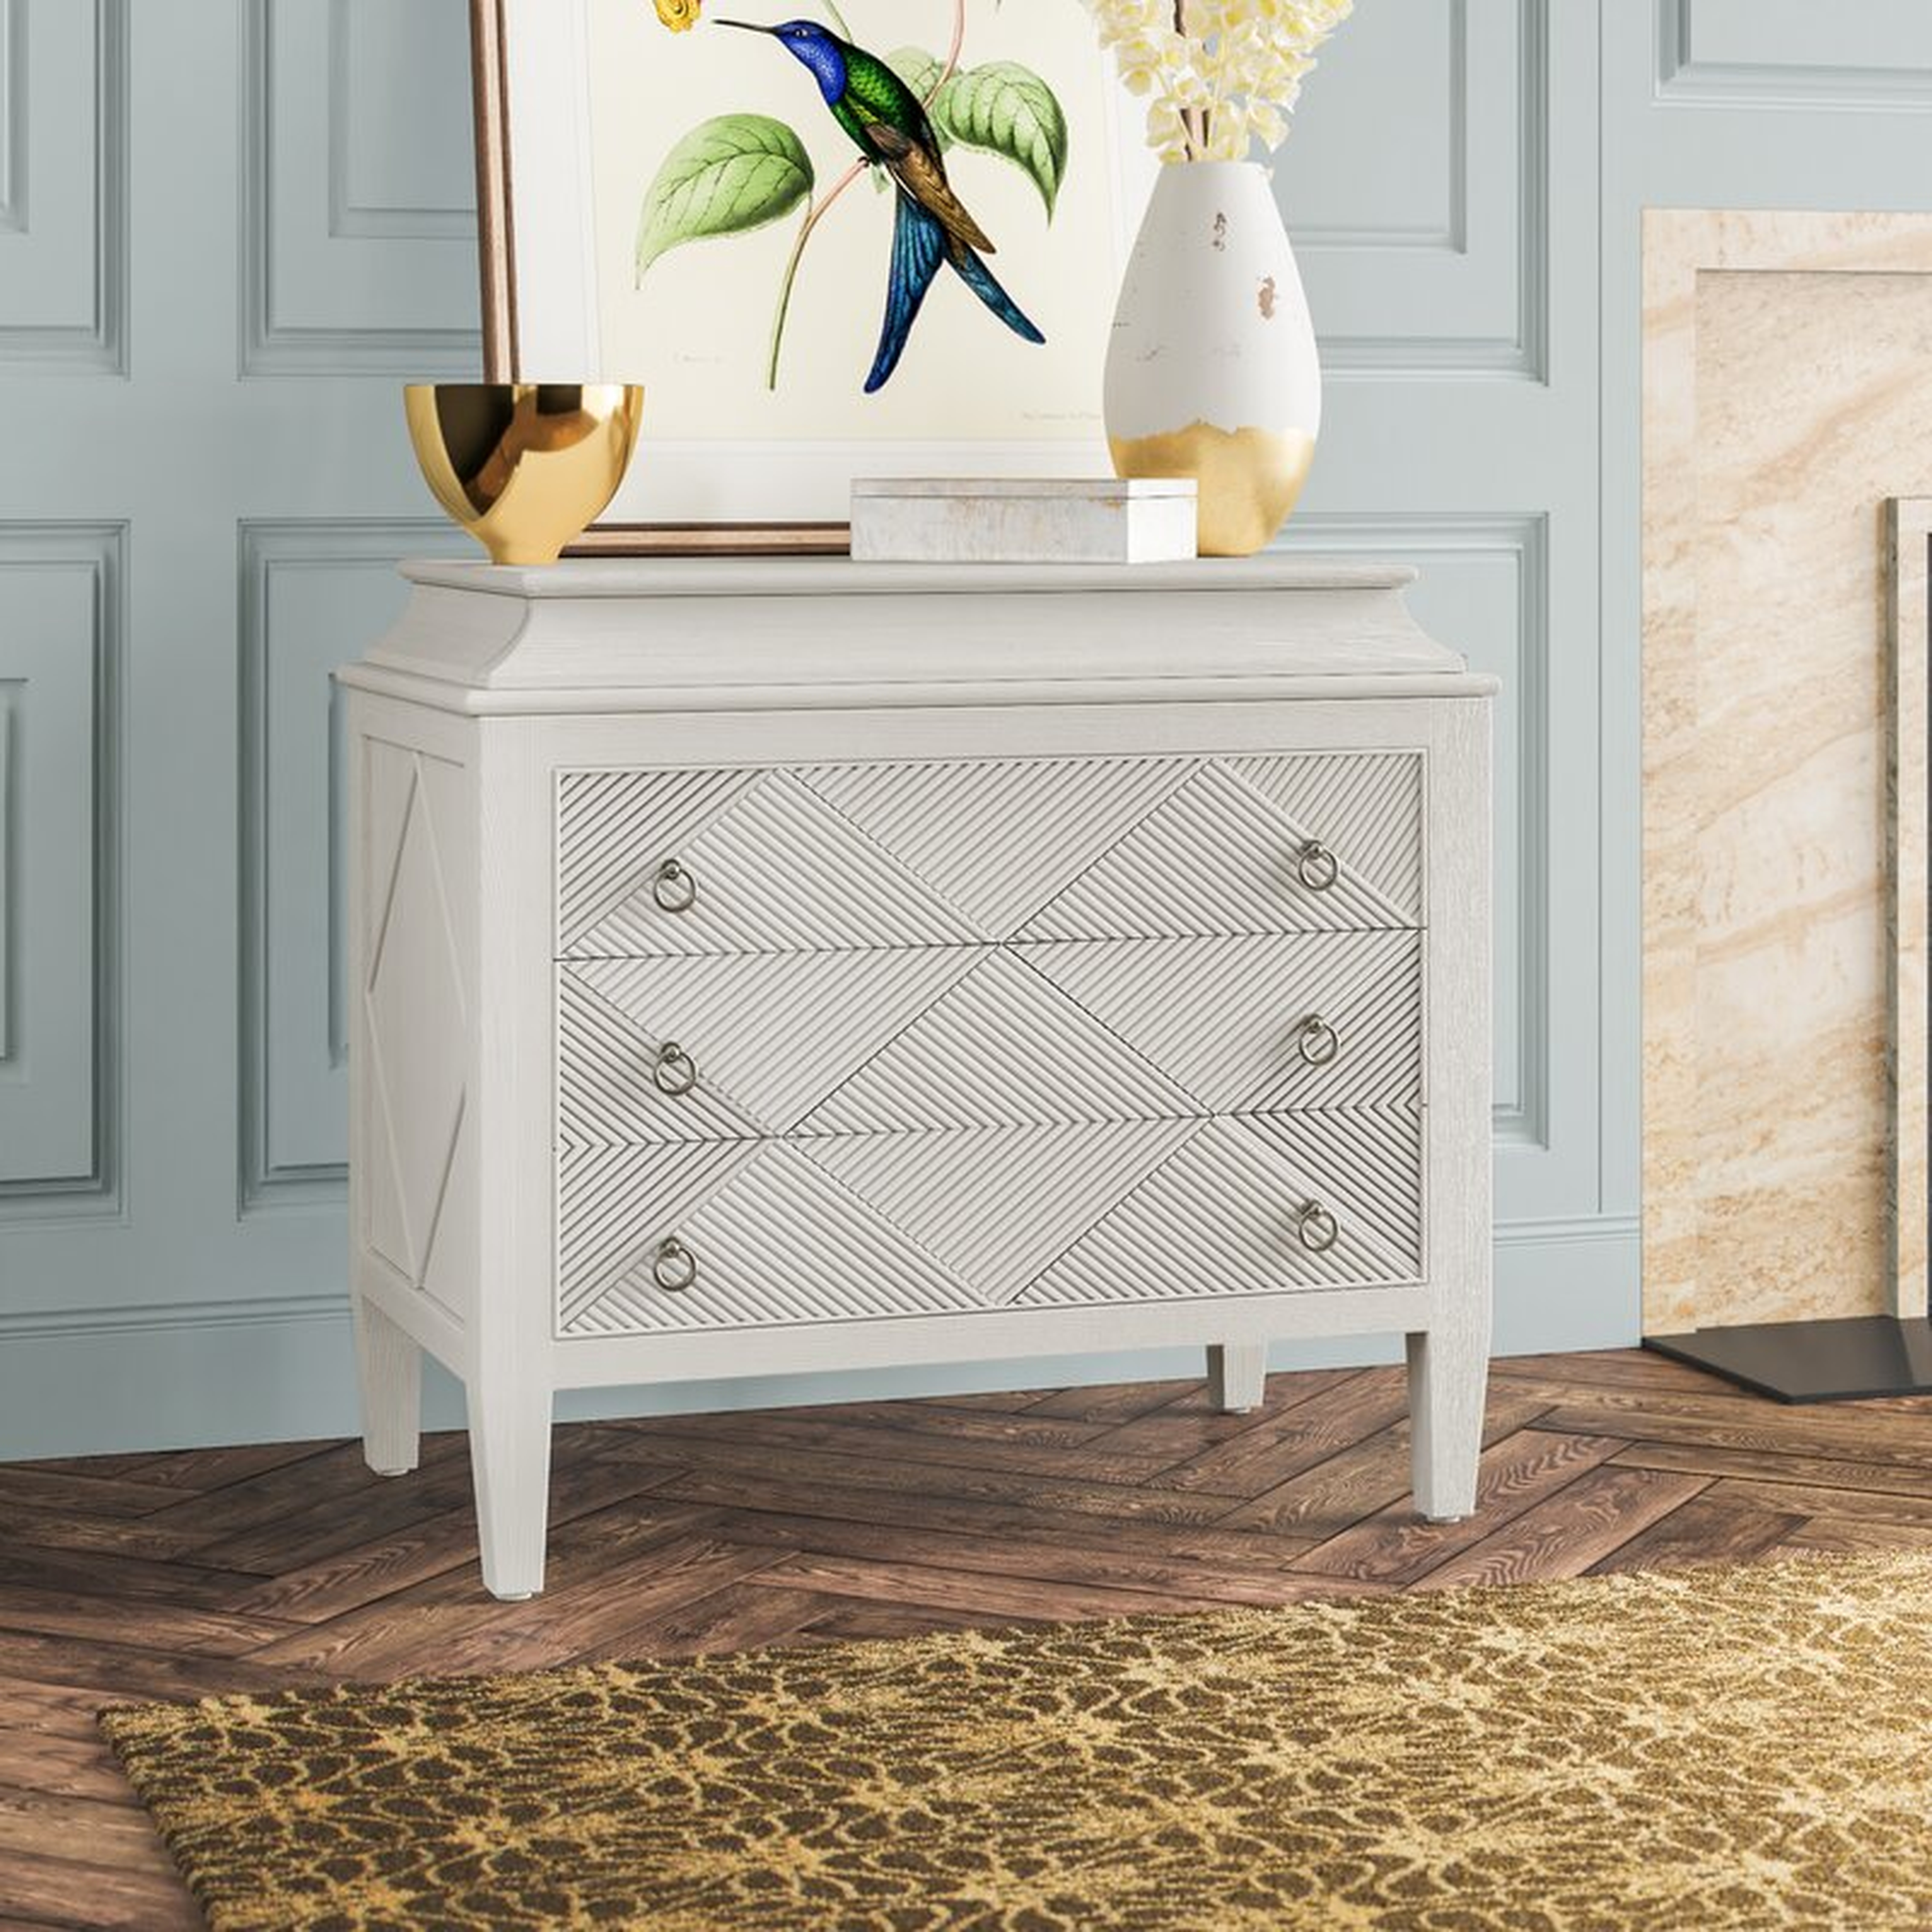 Gabby Marilyn 4 Drawer Accent Chest - Perigold